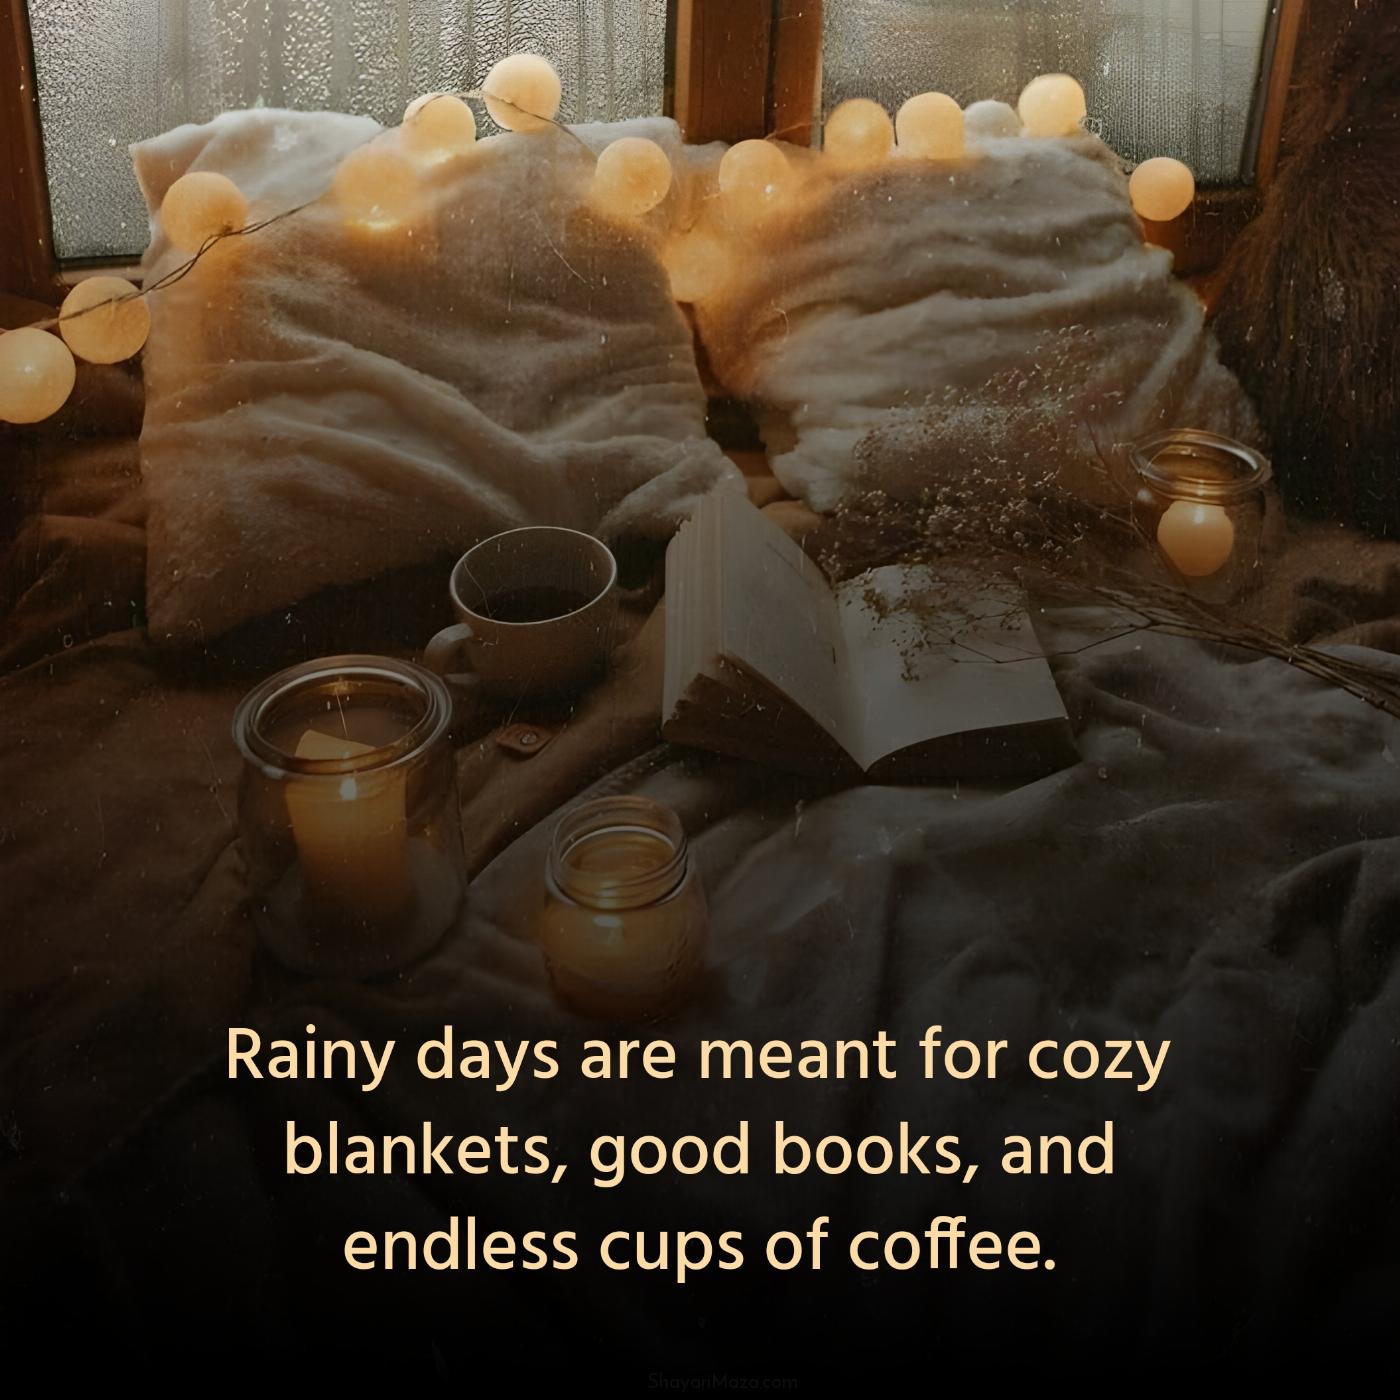 Rainy days are meant for cozy blankets good books